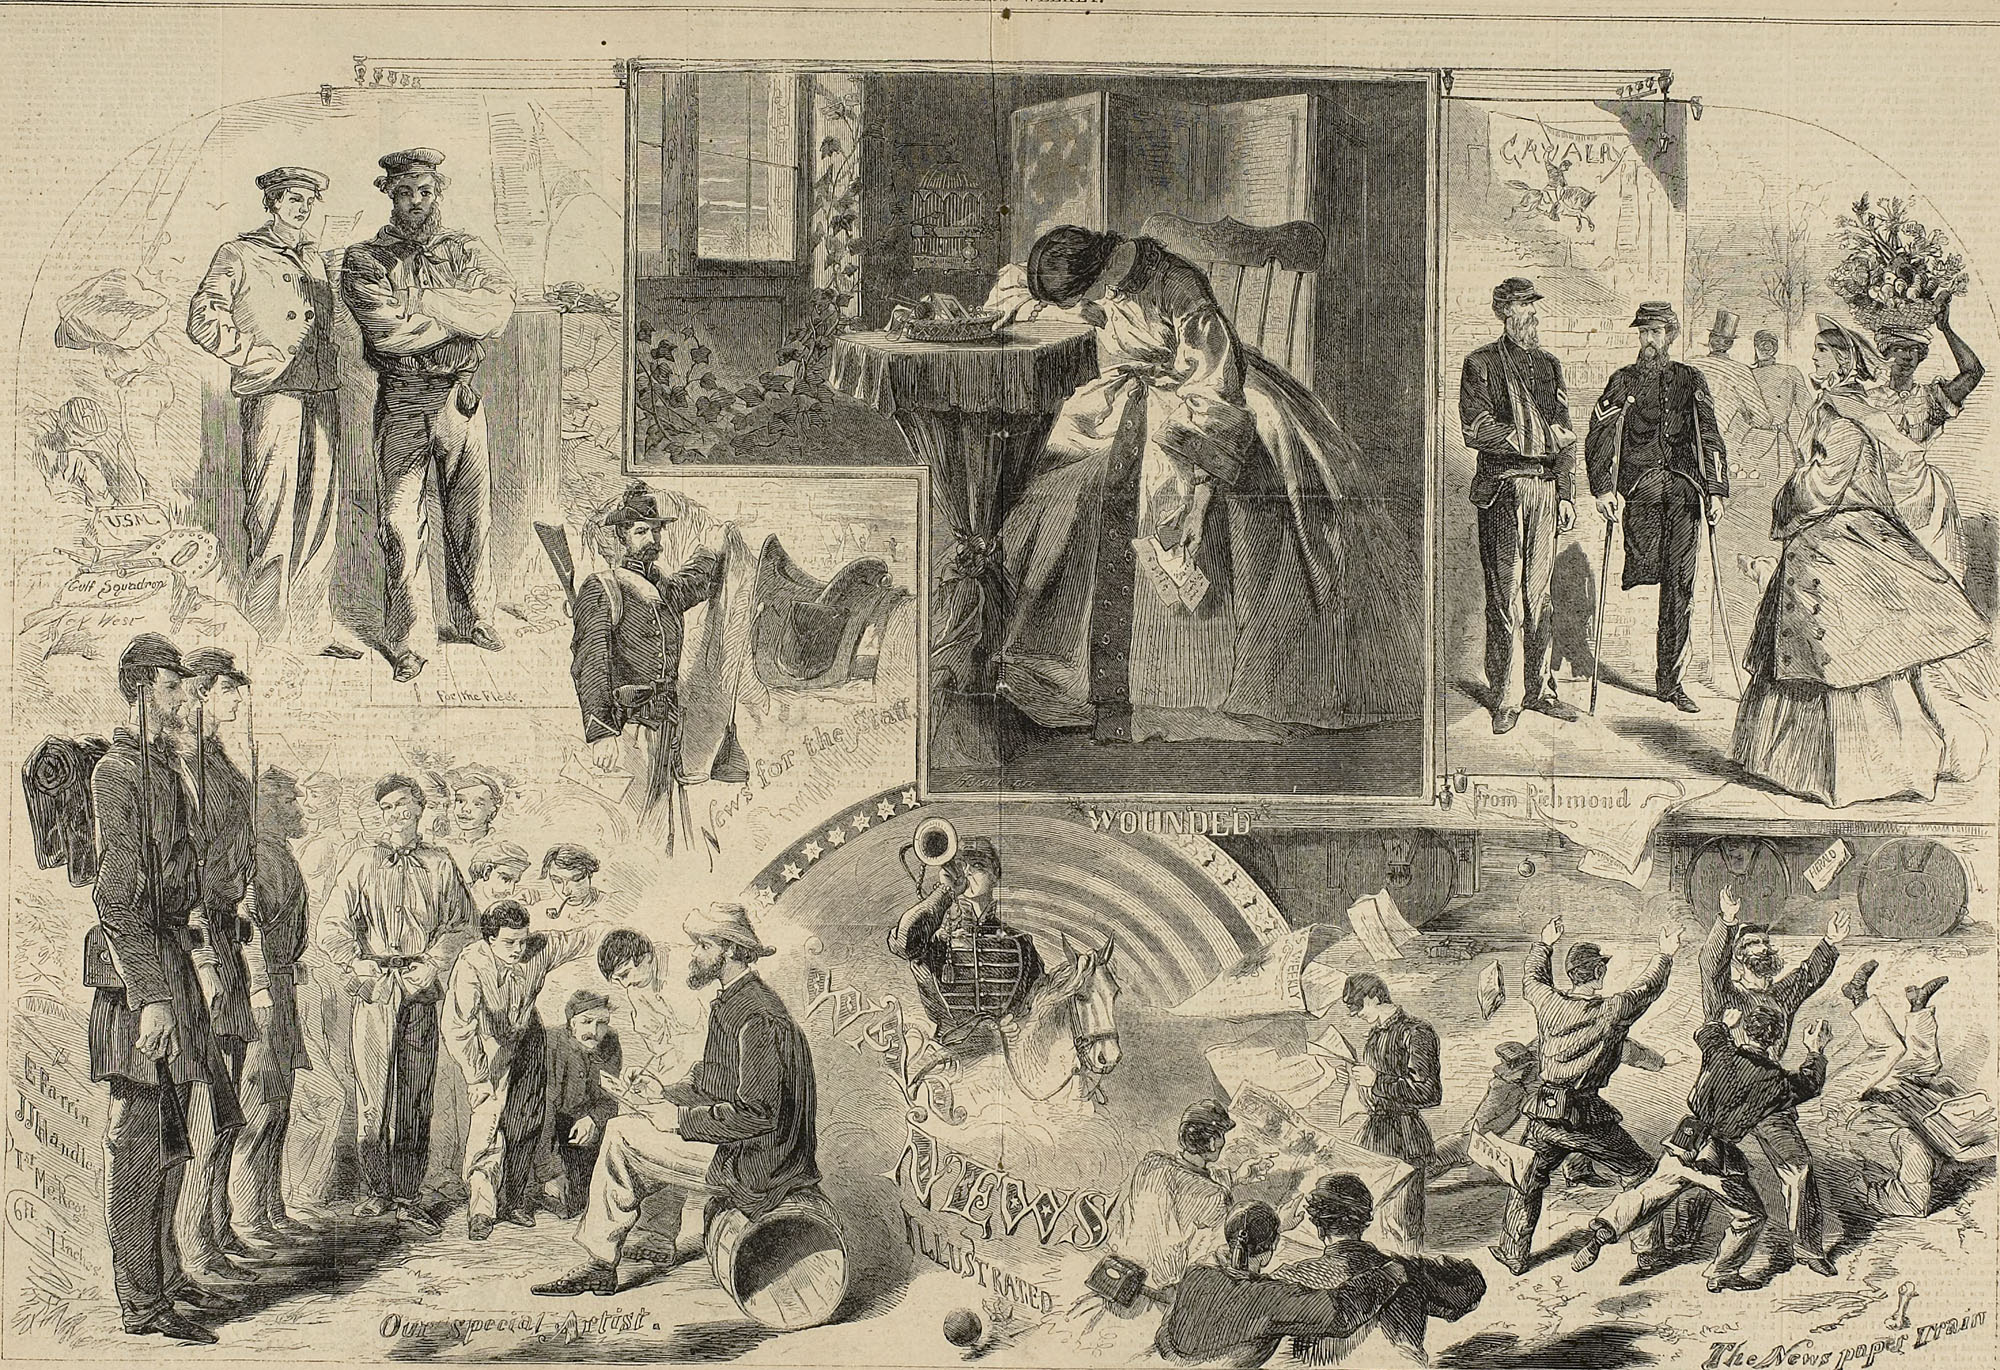 Winslow Homer, News from the War, 1862, wood engraving published by Harper's Weekly June 14, 1862, 13 3/8 x 20 5/16 inches (The Art Institute of Chicago)